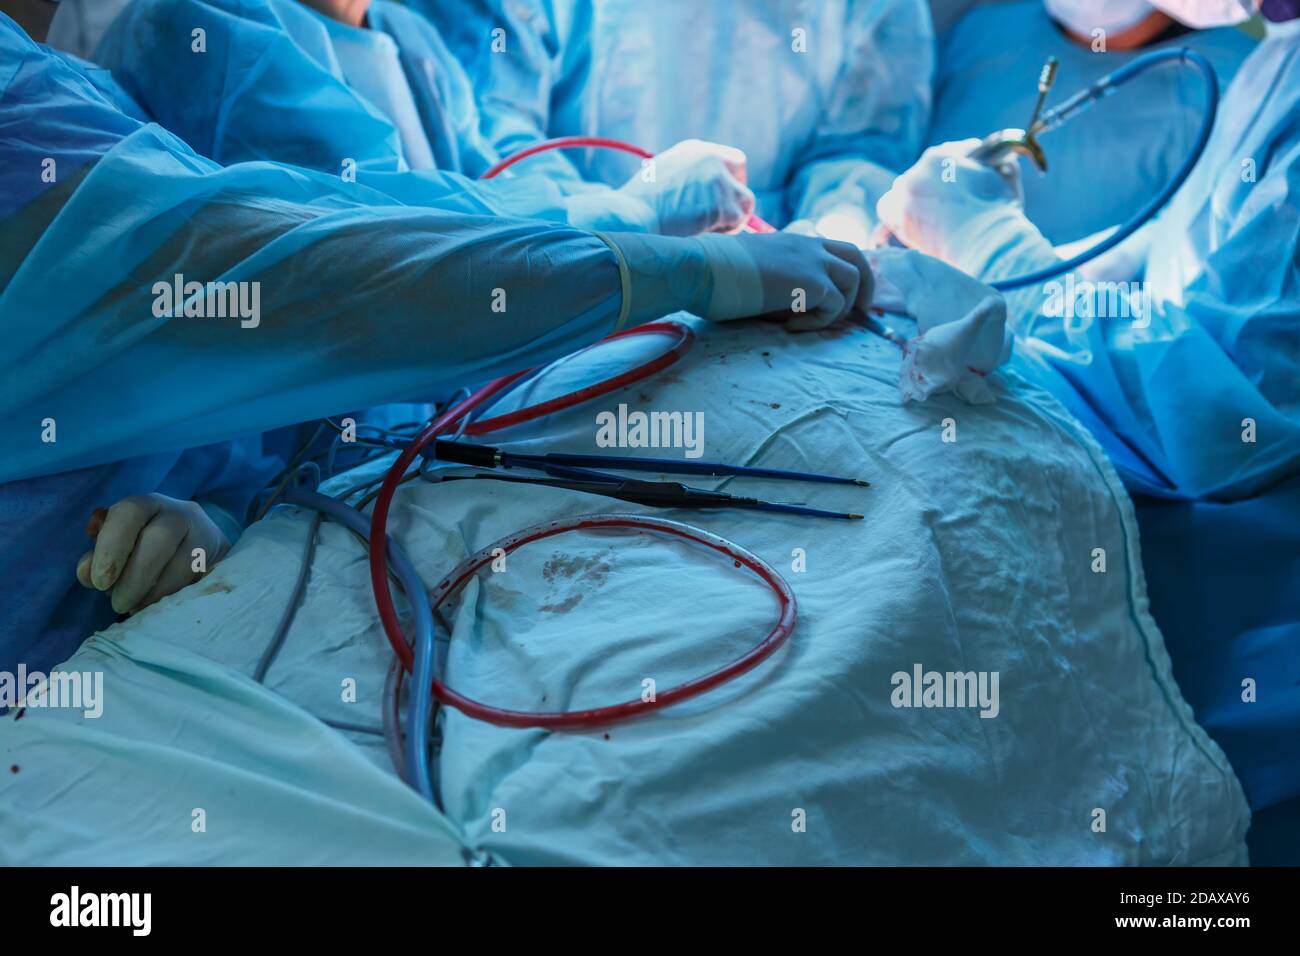 Surgeons hands with tools during surgery closeup Stock Photo